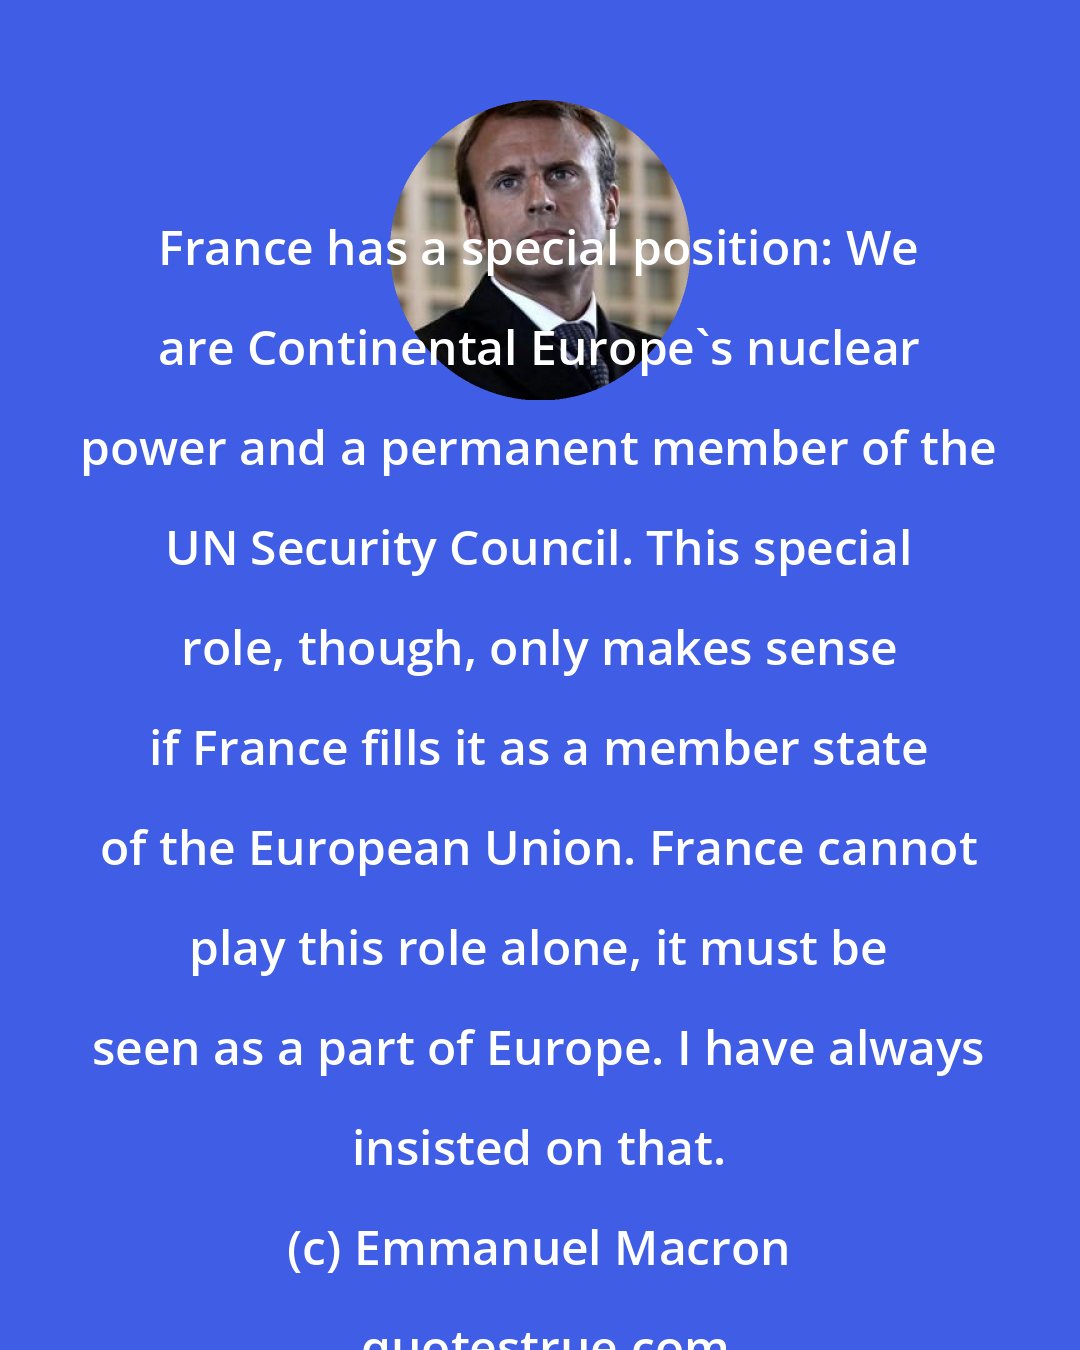 Emmanuel Macron: France has a special position: We are Continental Europe's nuclear power and a permanent member of the UN Security Council. This special role, though, only makes sense if France fills it as a member state of the European Union. France cannot play this role alone, it must be seen as a part of Europe. I have always insisted on that.